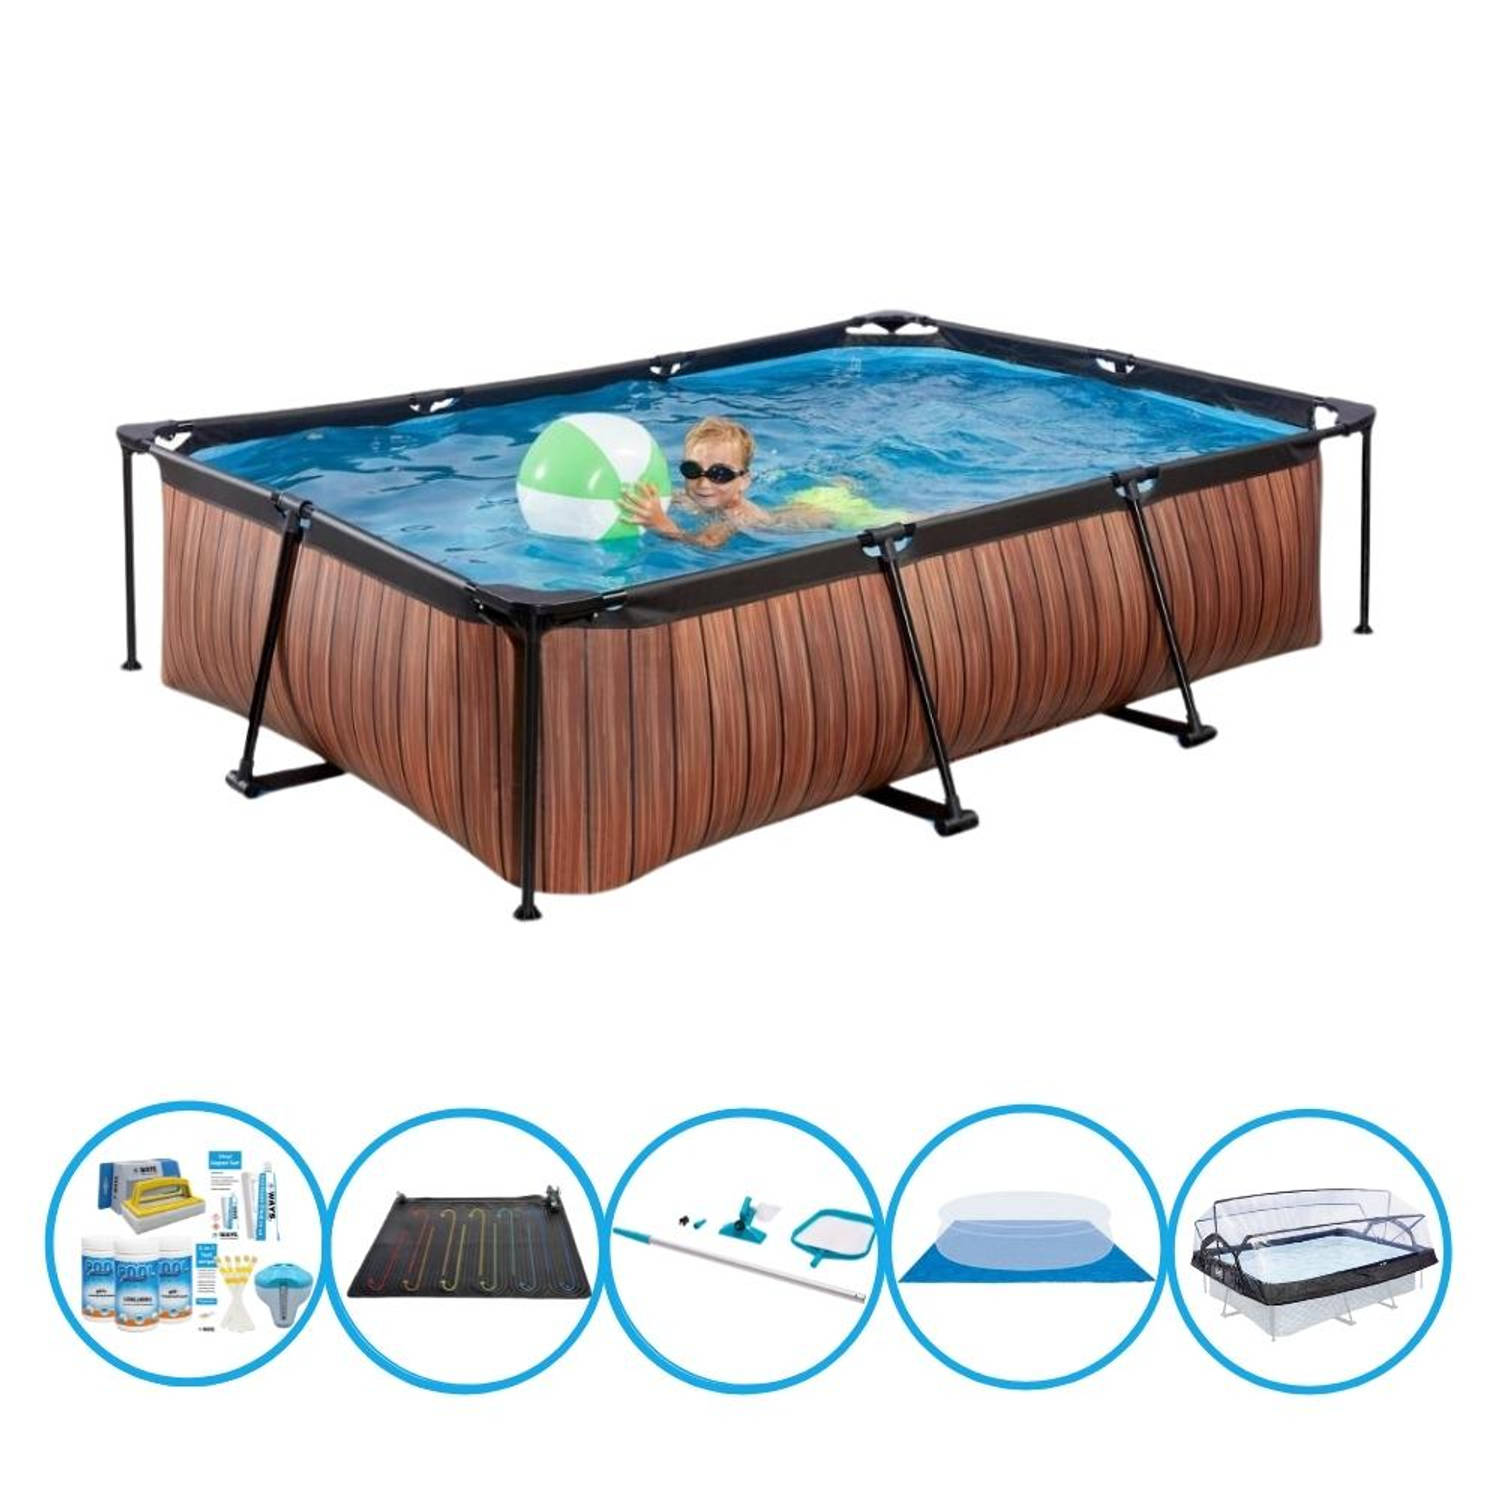 EXIT Toys Exit Zwembad Timber Style - 300x200x65 Cm - Frame Pool - Inclusief Accessoires - Bruin